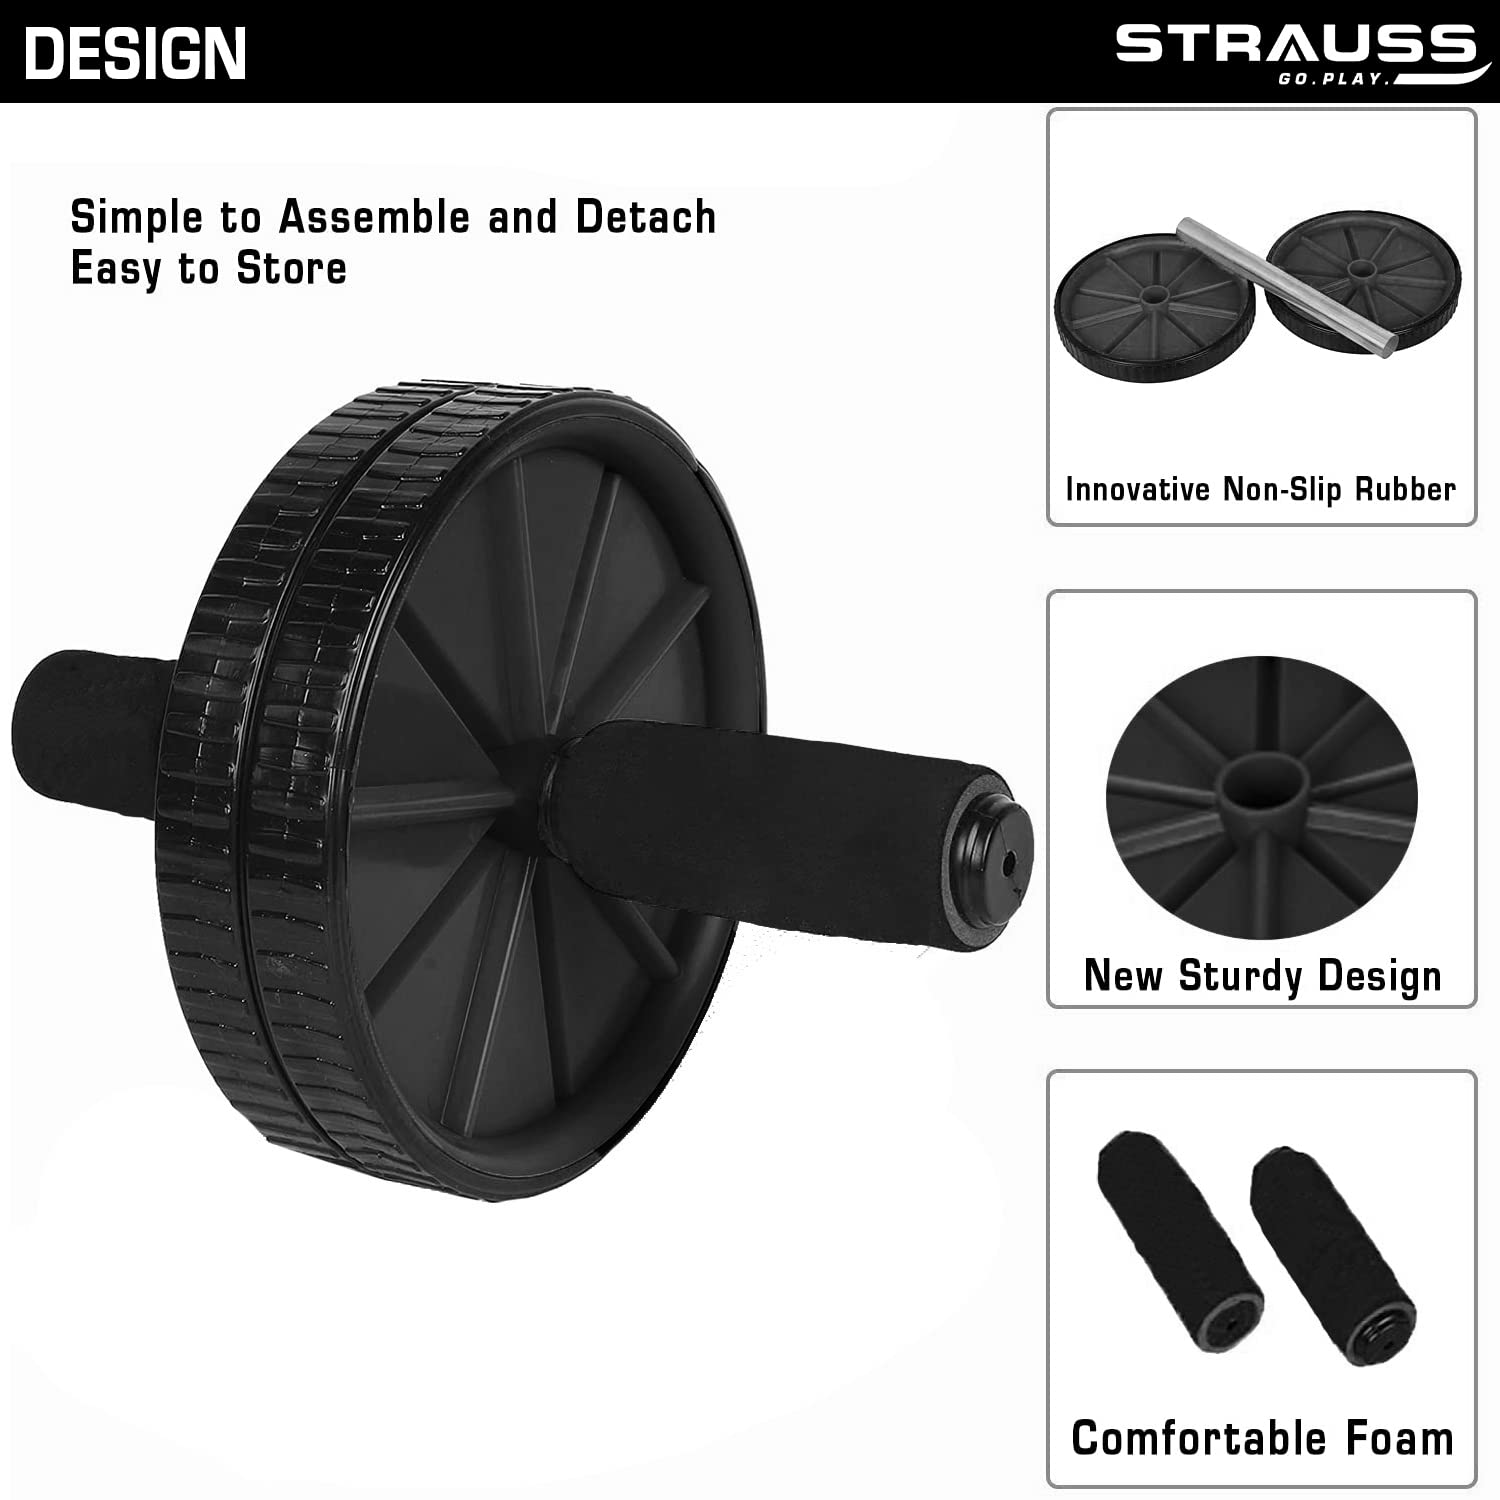 Strauss Double Wheel Ab & Exercise Roller | Anti-Skid Wheel Base, Non-Slip PVC Handles with Foam | Ideal for Home, Gym workout for Abs, Tummy, (Black)